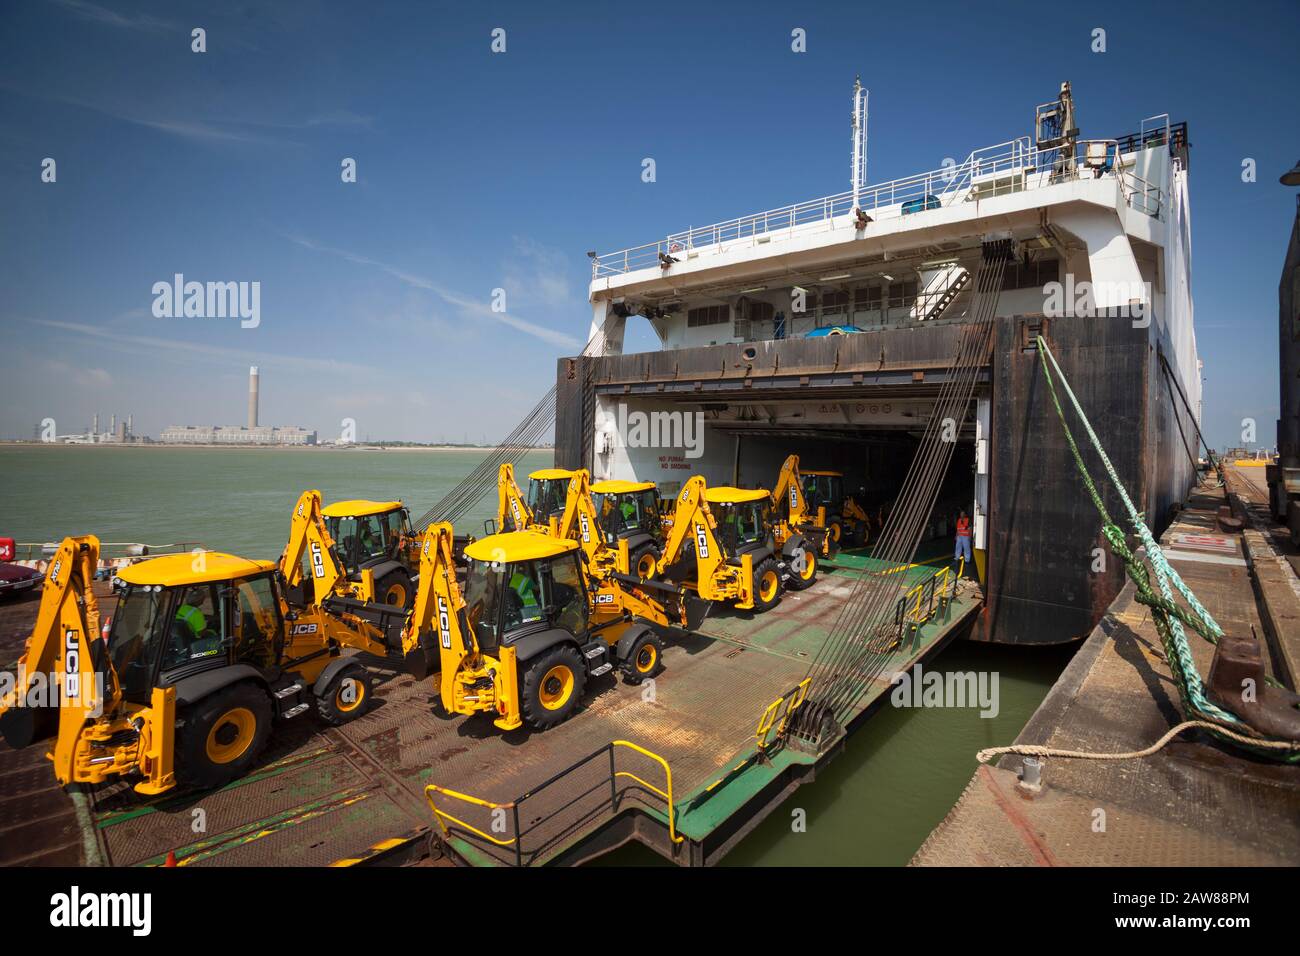 Loading JCB diggers for Export trade Brexit Stock Photo